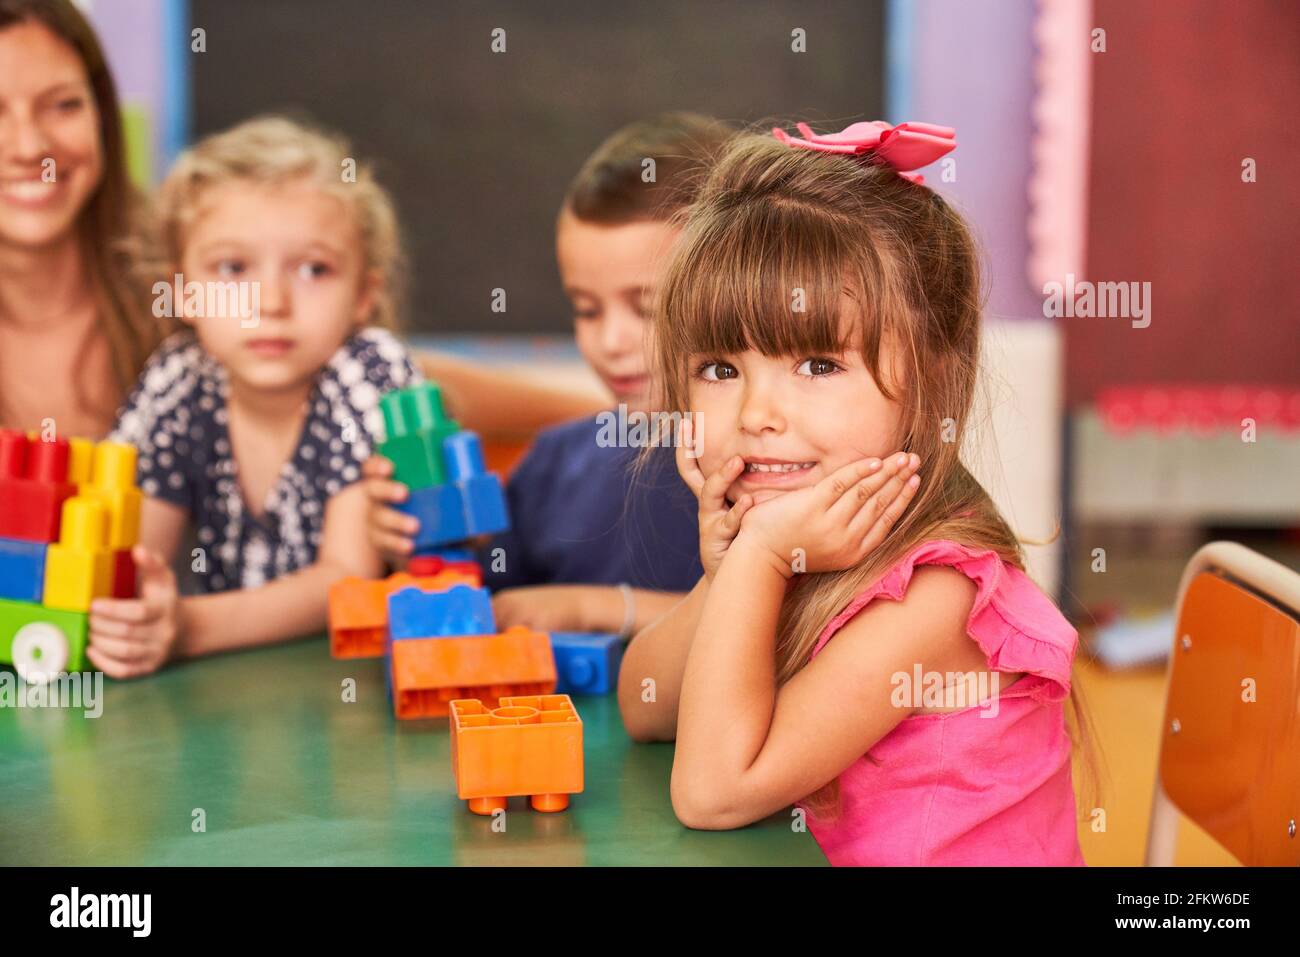 Little girl and her friends in kindergarten or after-school care center play with colorful building blocks Stock Photo